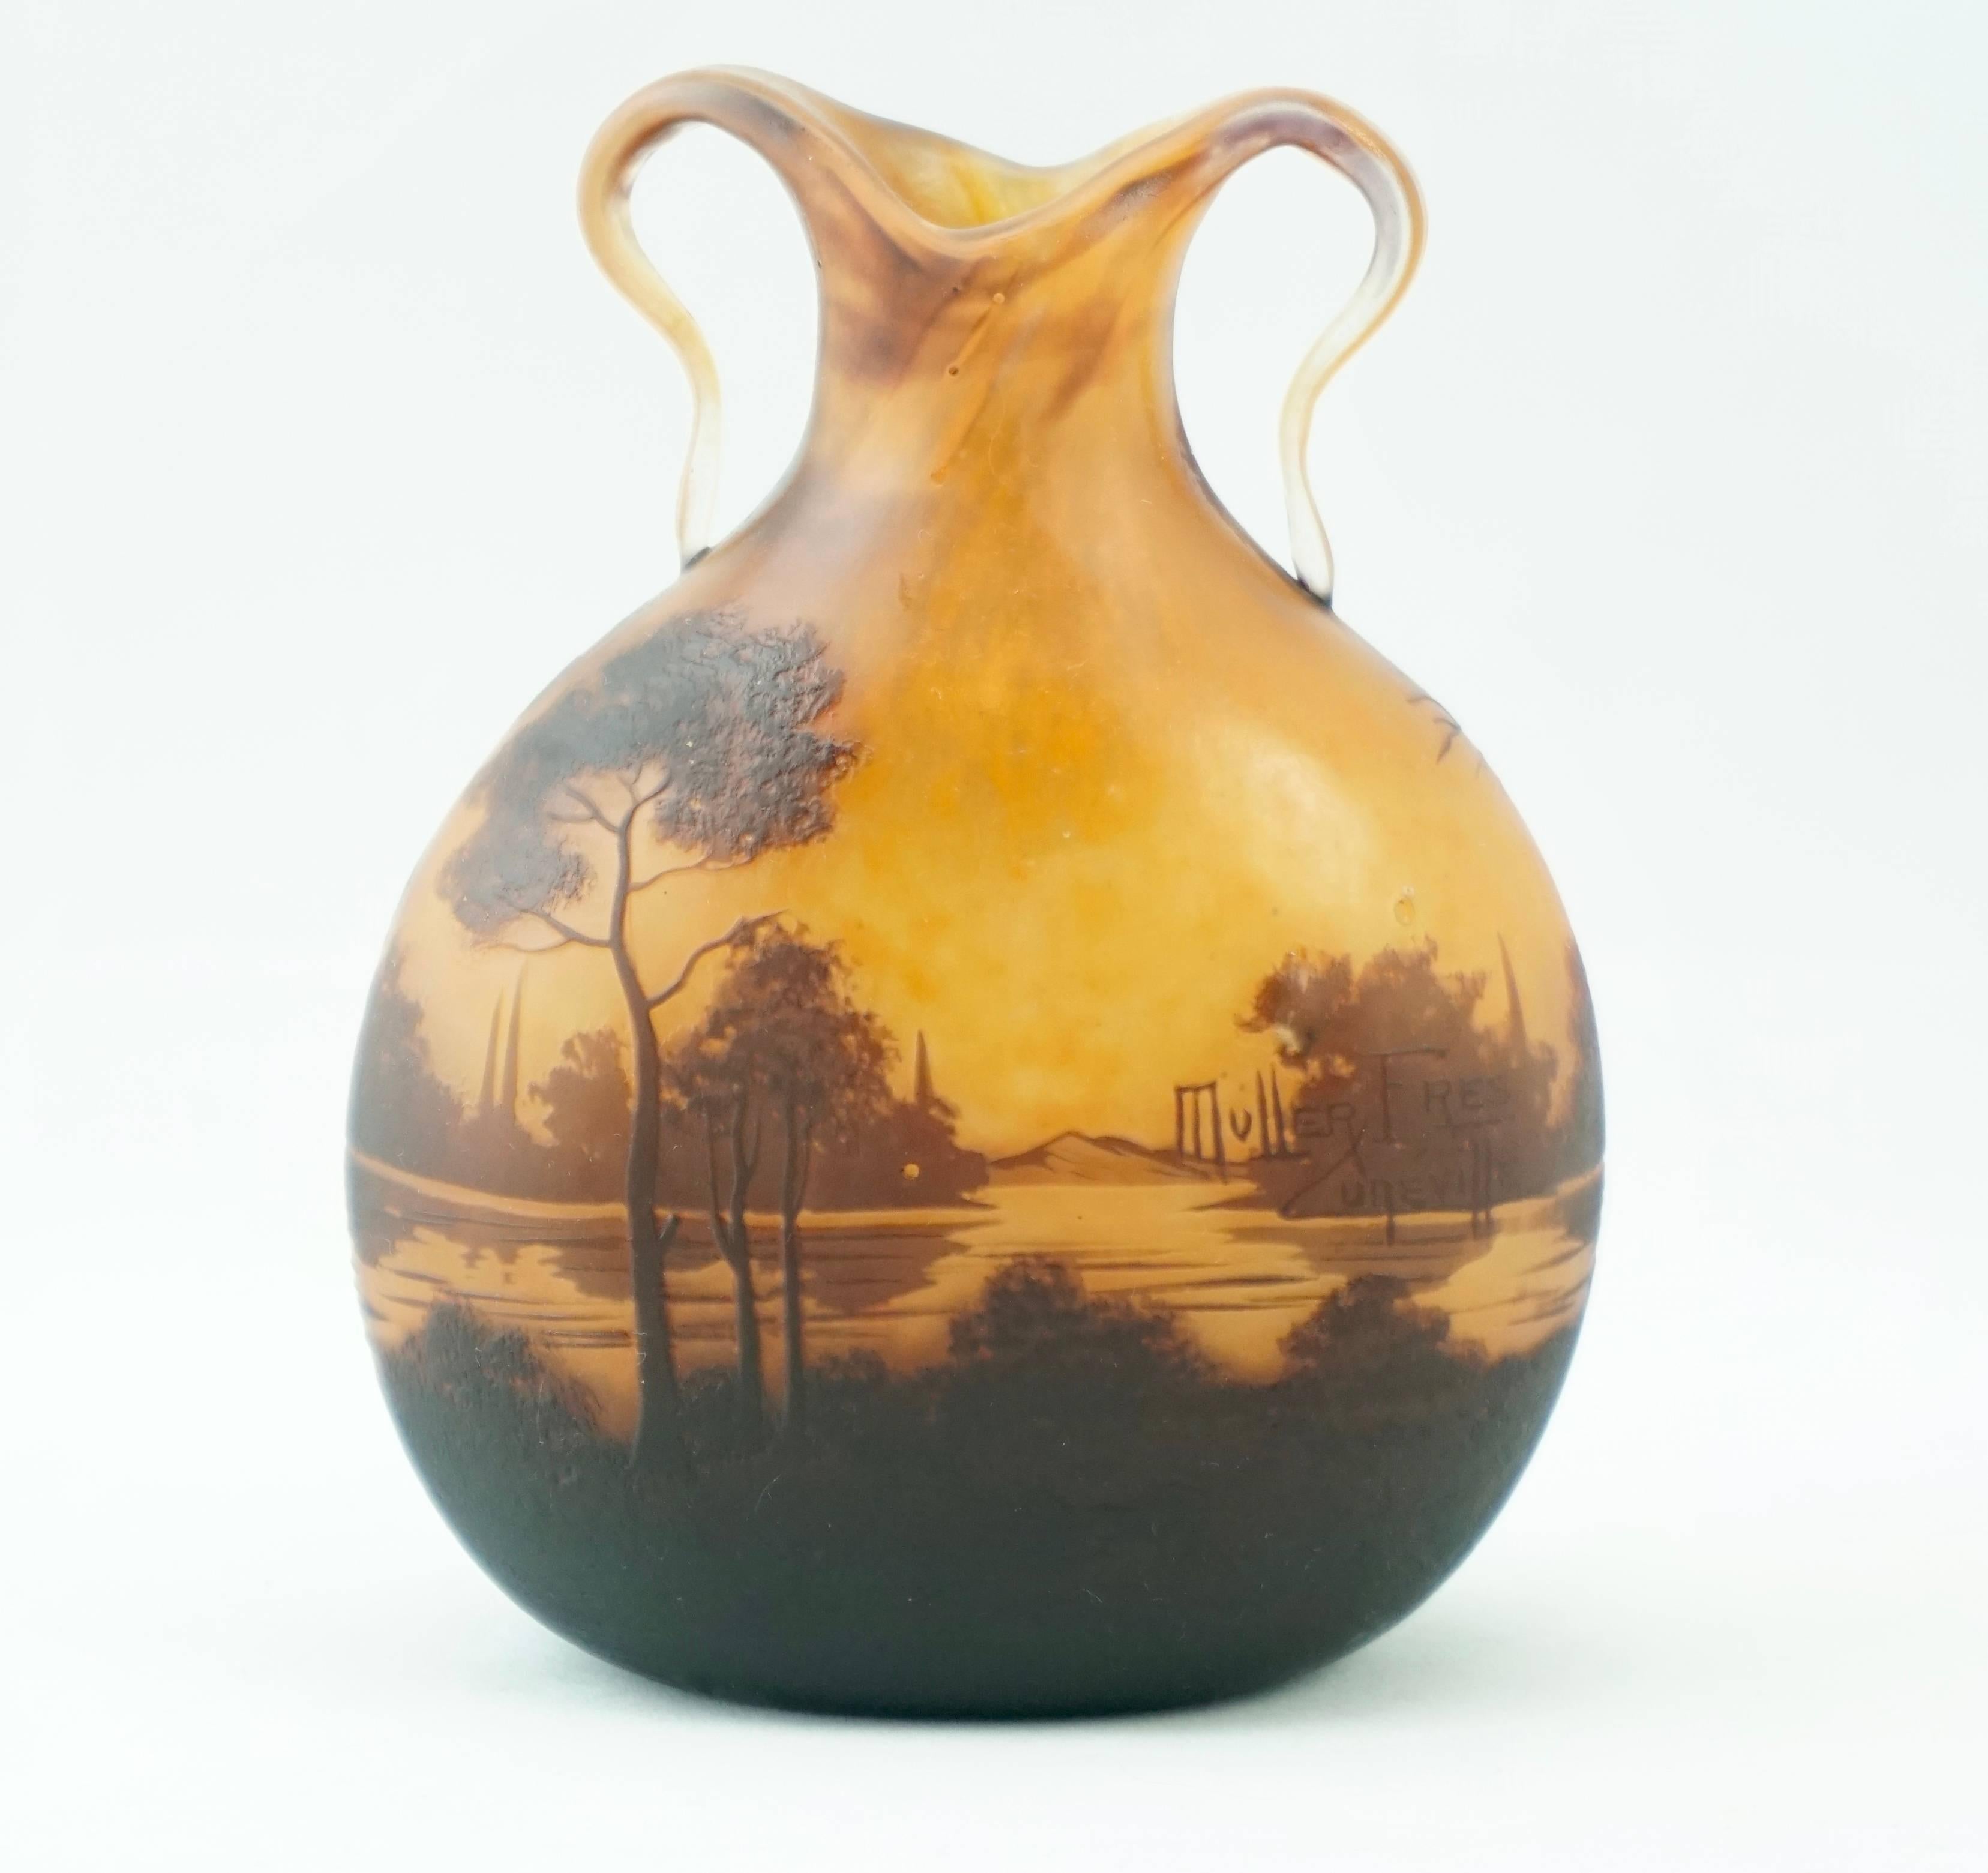 A sumptuous art nouveau French cameo lake landscape acid etched cameo vase with applied handles. Sunrise or sunset with a yellow orange background with engraved trees, bushes and mountains surrounding a pond or lake.

Signed in cameo: Muller Freres